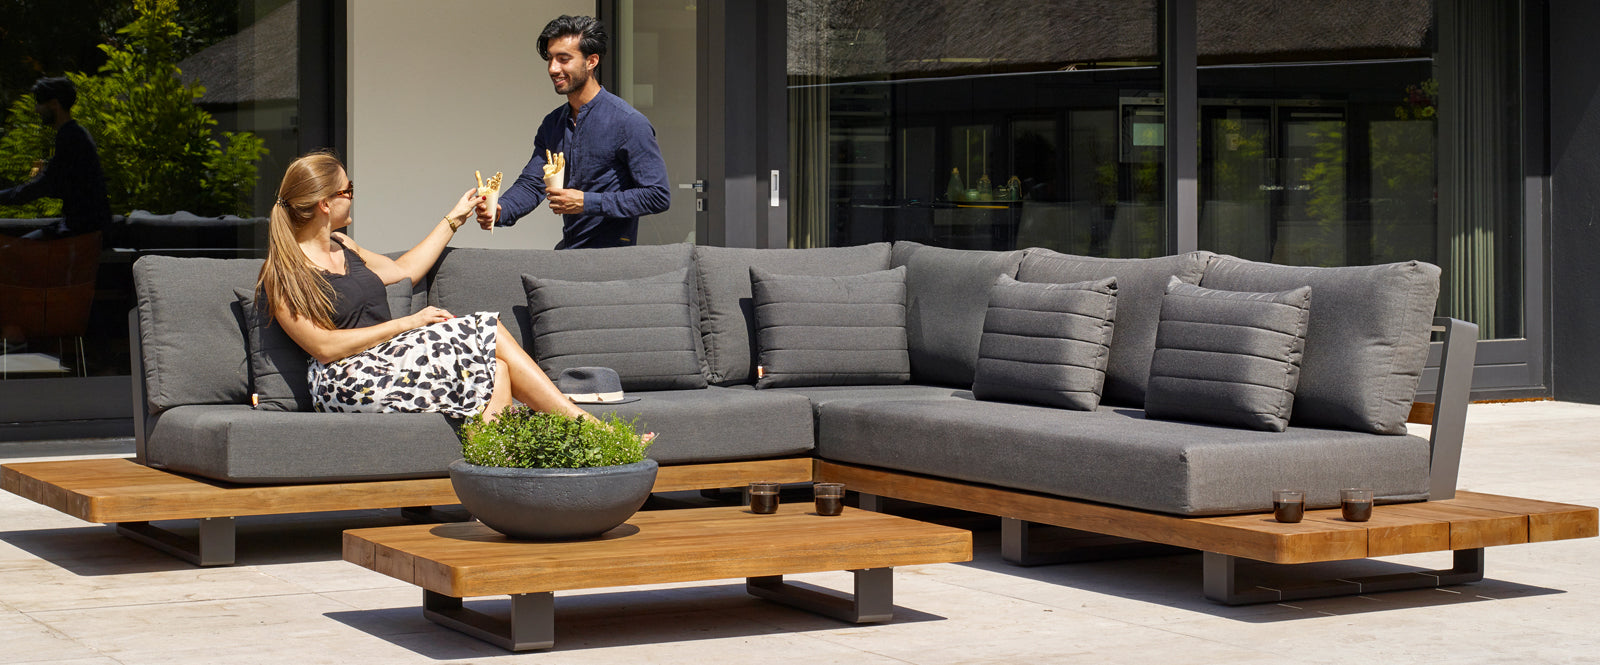 From Modern To Traditional - Outdoor Patio Furniture to fit any style and space.